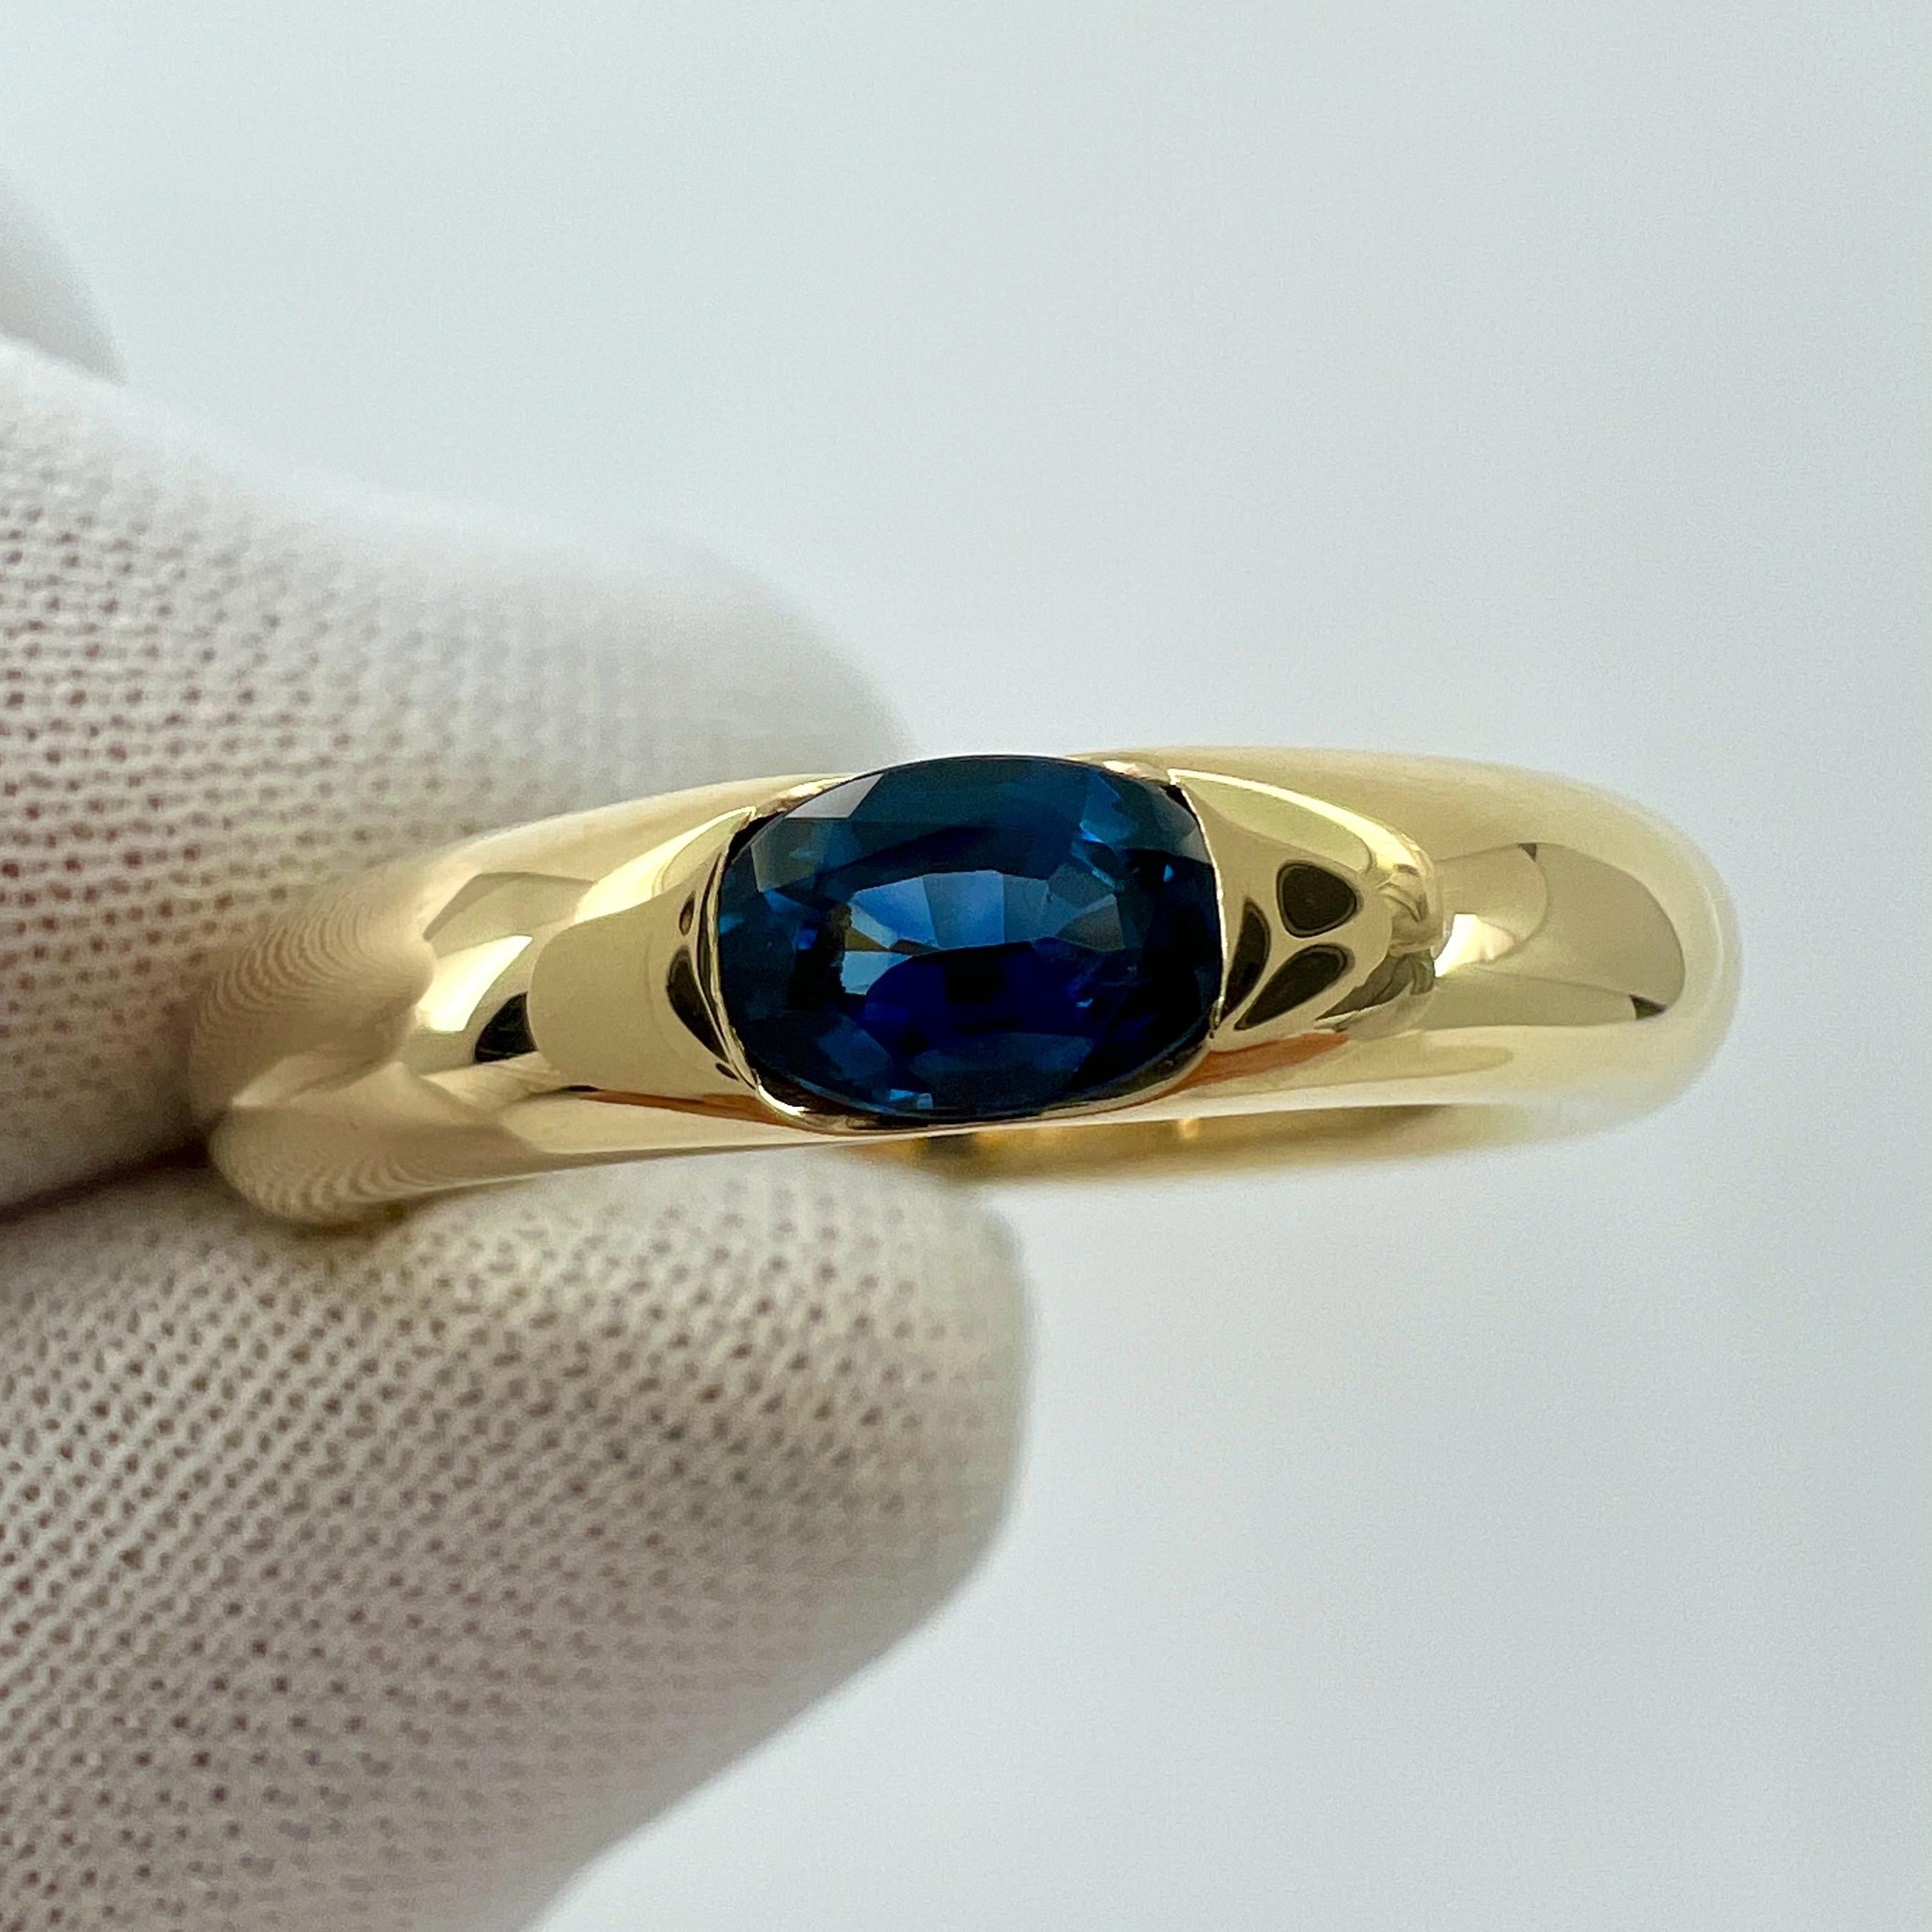 Vintage Cartier Blue Sapphire Oval Ellipse 18k Yellow Gold Solitaire Ring US5 49 For Sale 7